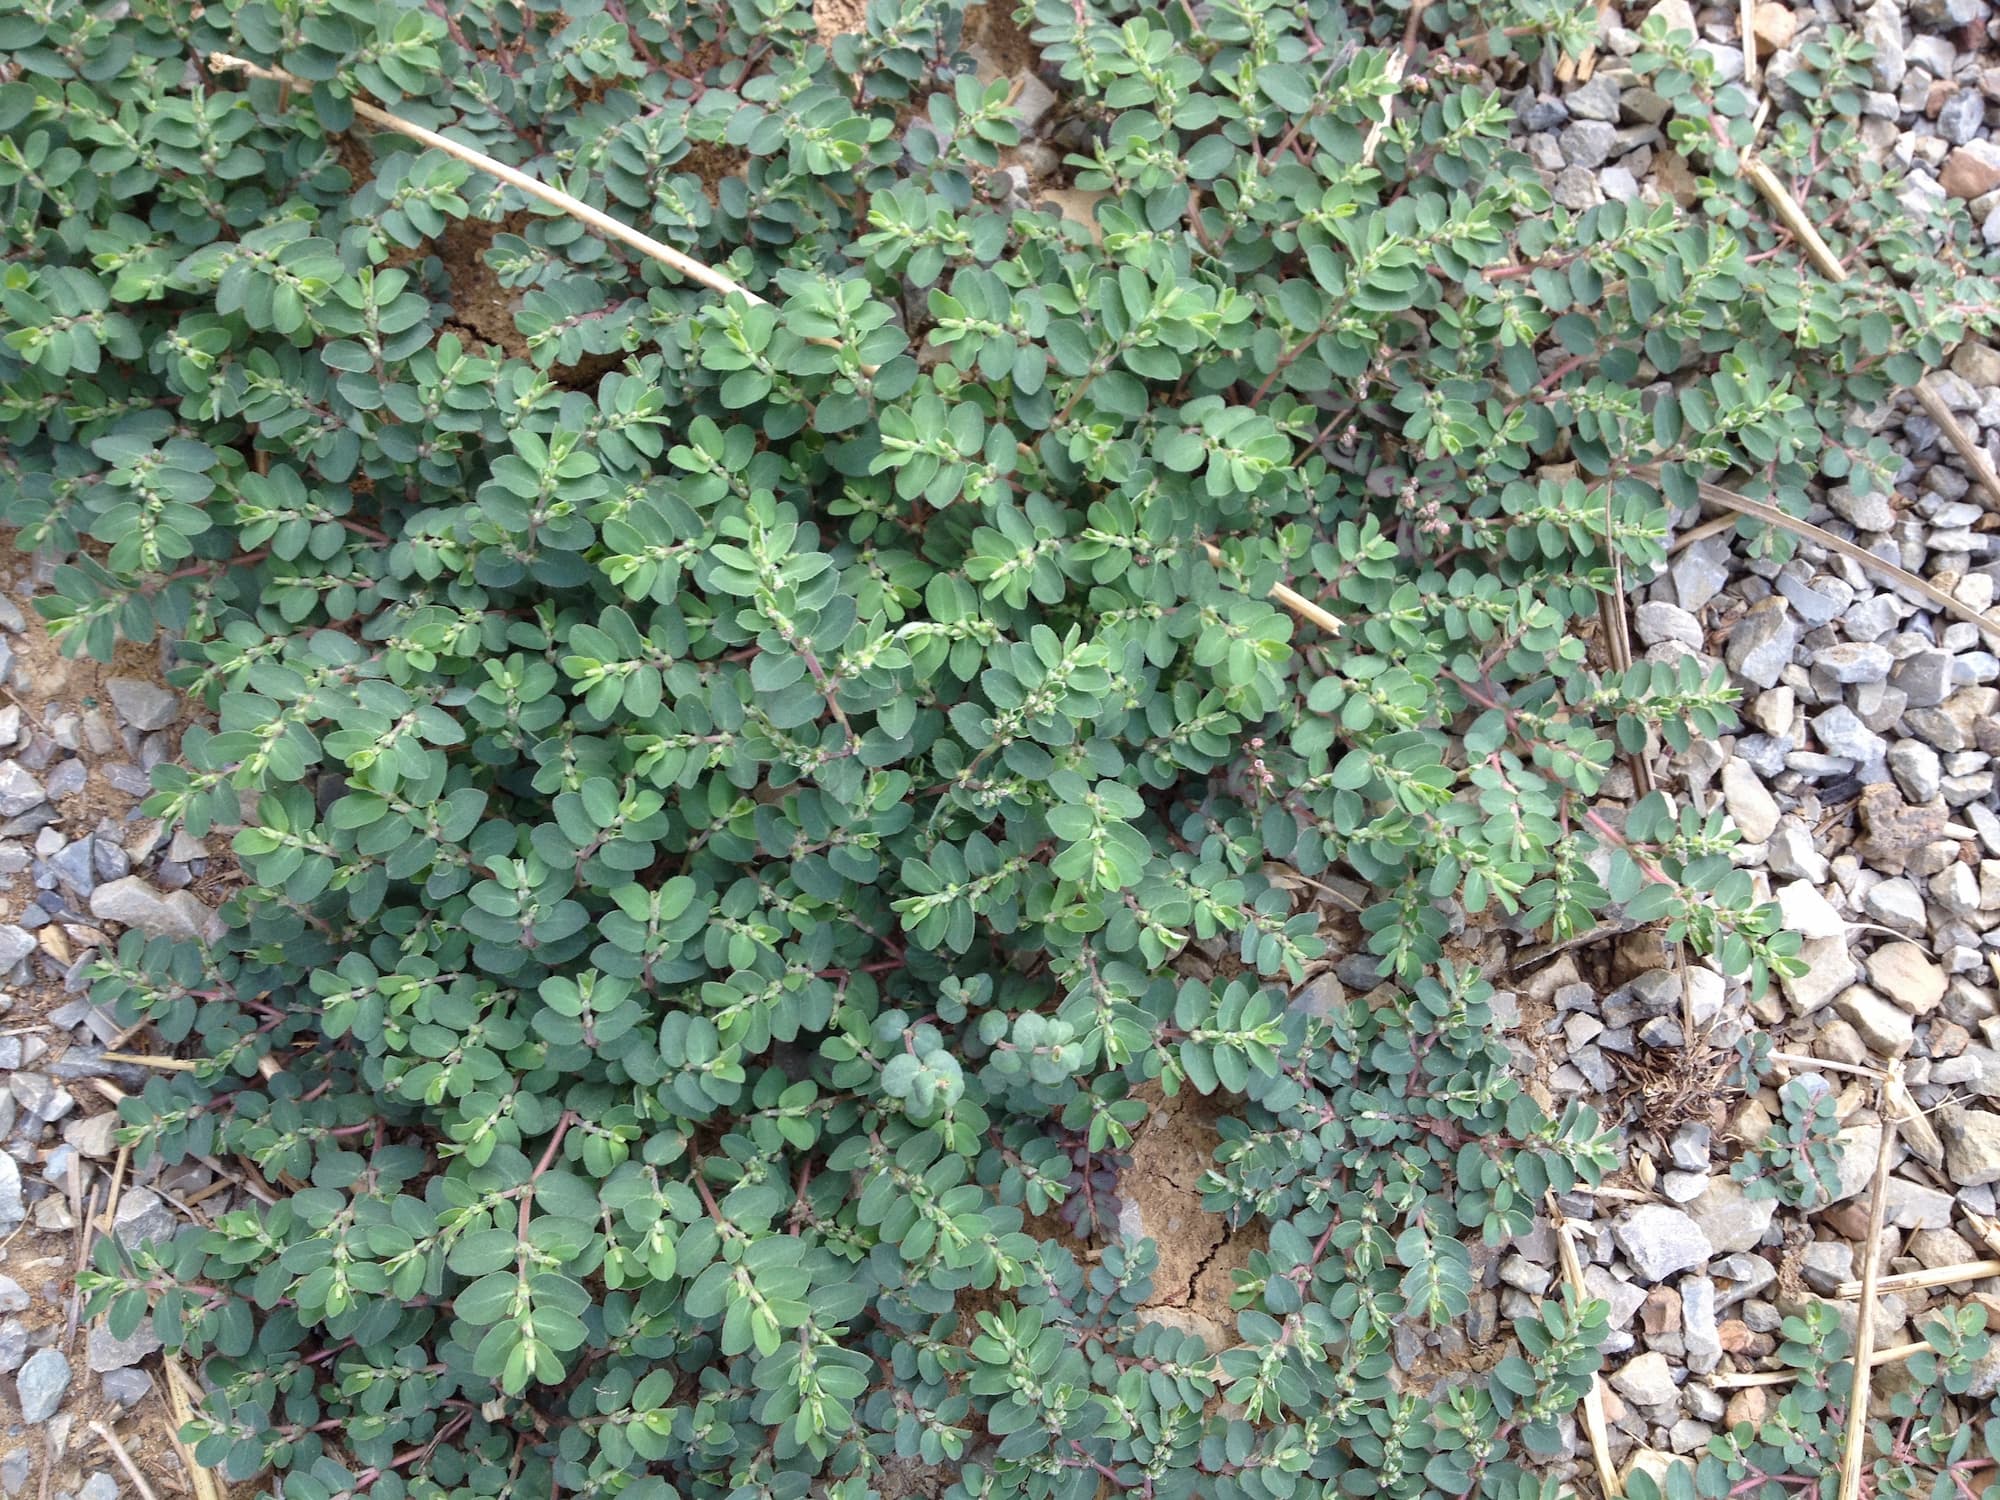 Spurge: similar features in the same season, but obviously not purslane upon inspection.